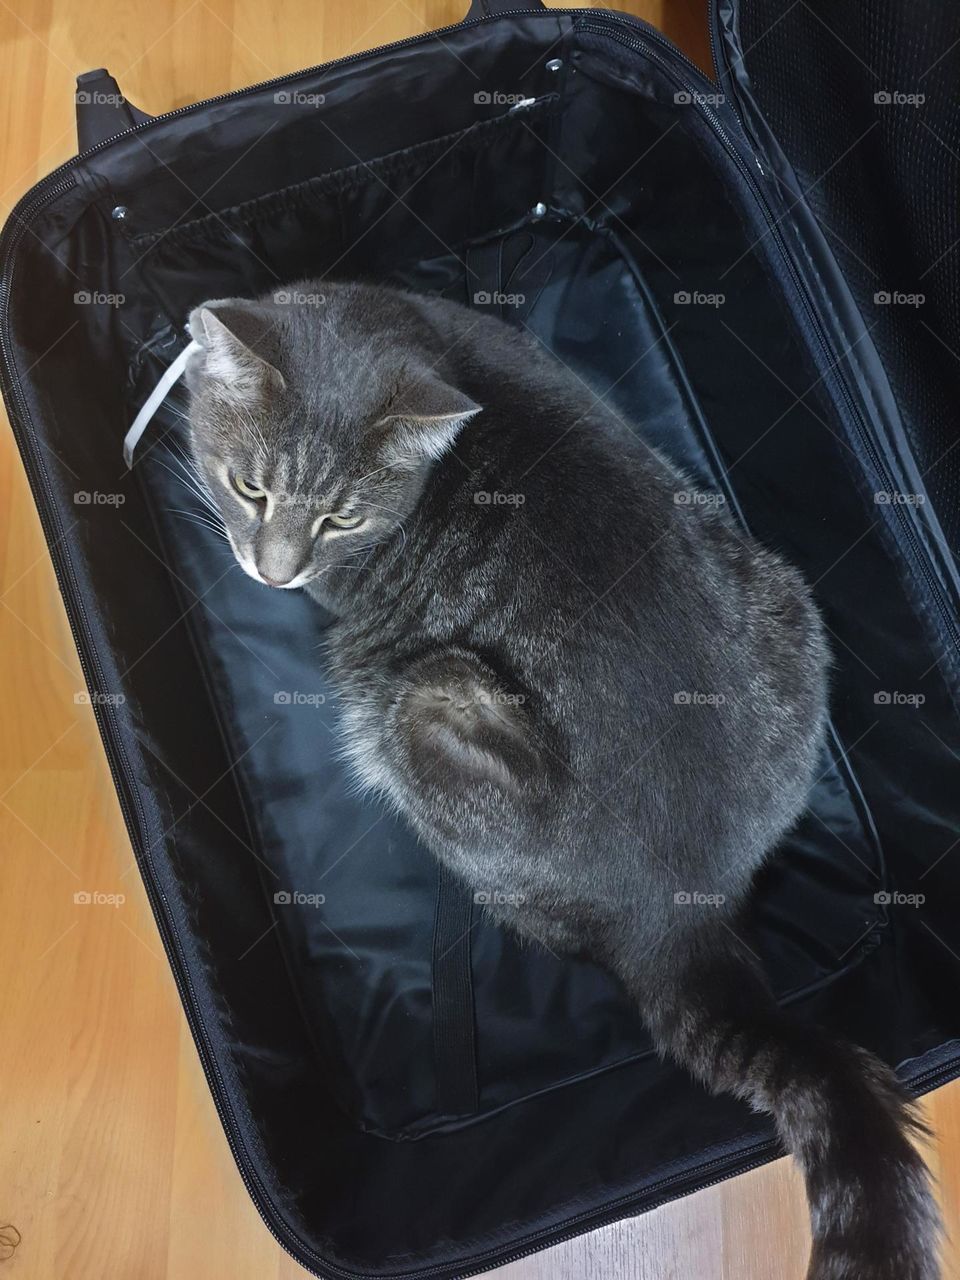 rectangular suitcase with a cat inside